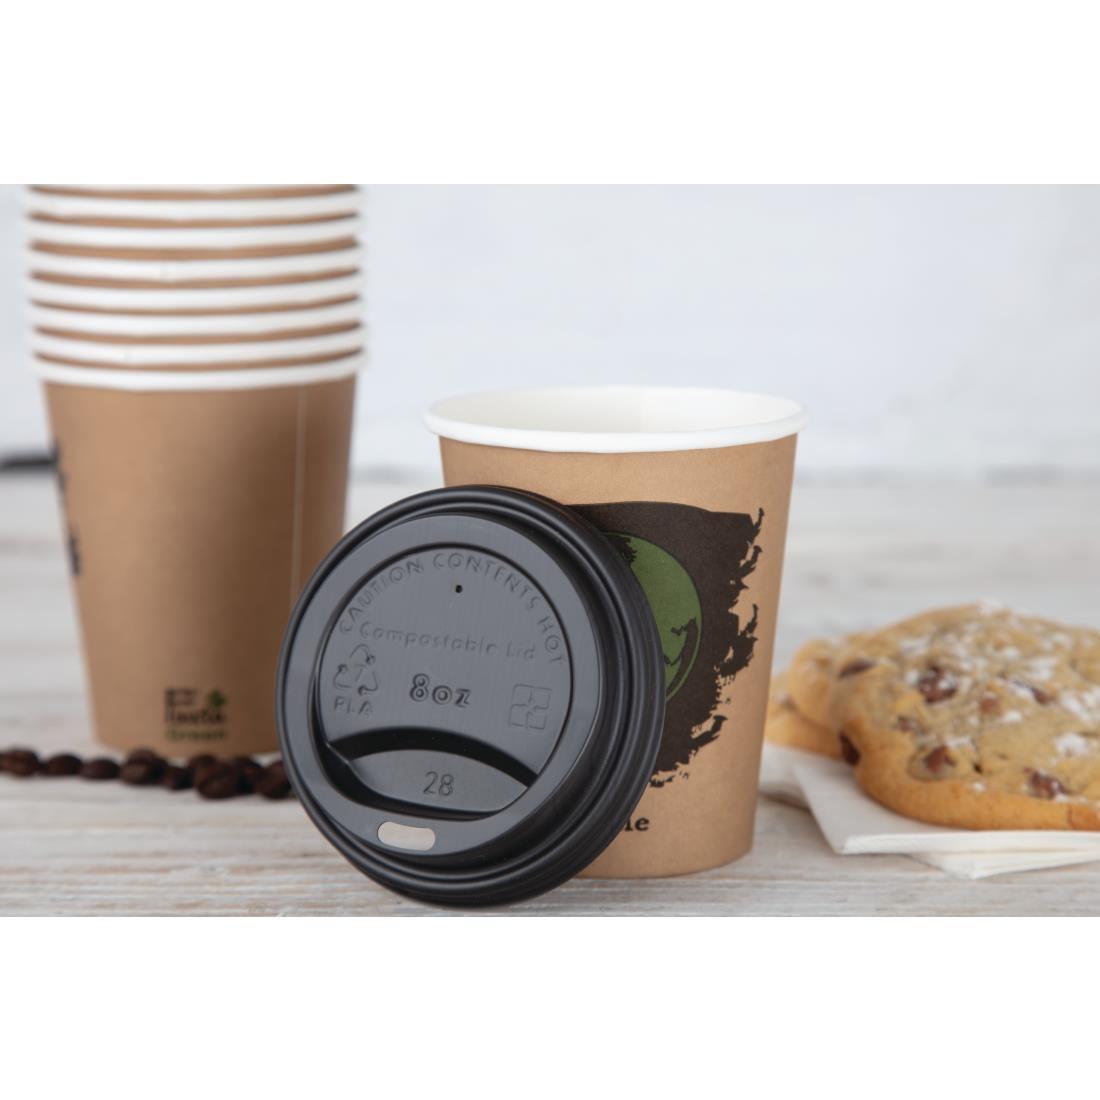 Fiesta Compostable Coffee Cup Lids 225ml / 8oz (Pack of 50) - DS054  - 5